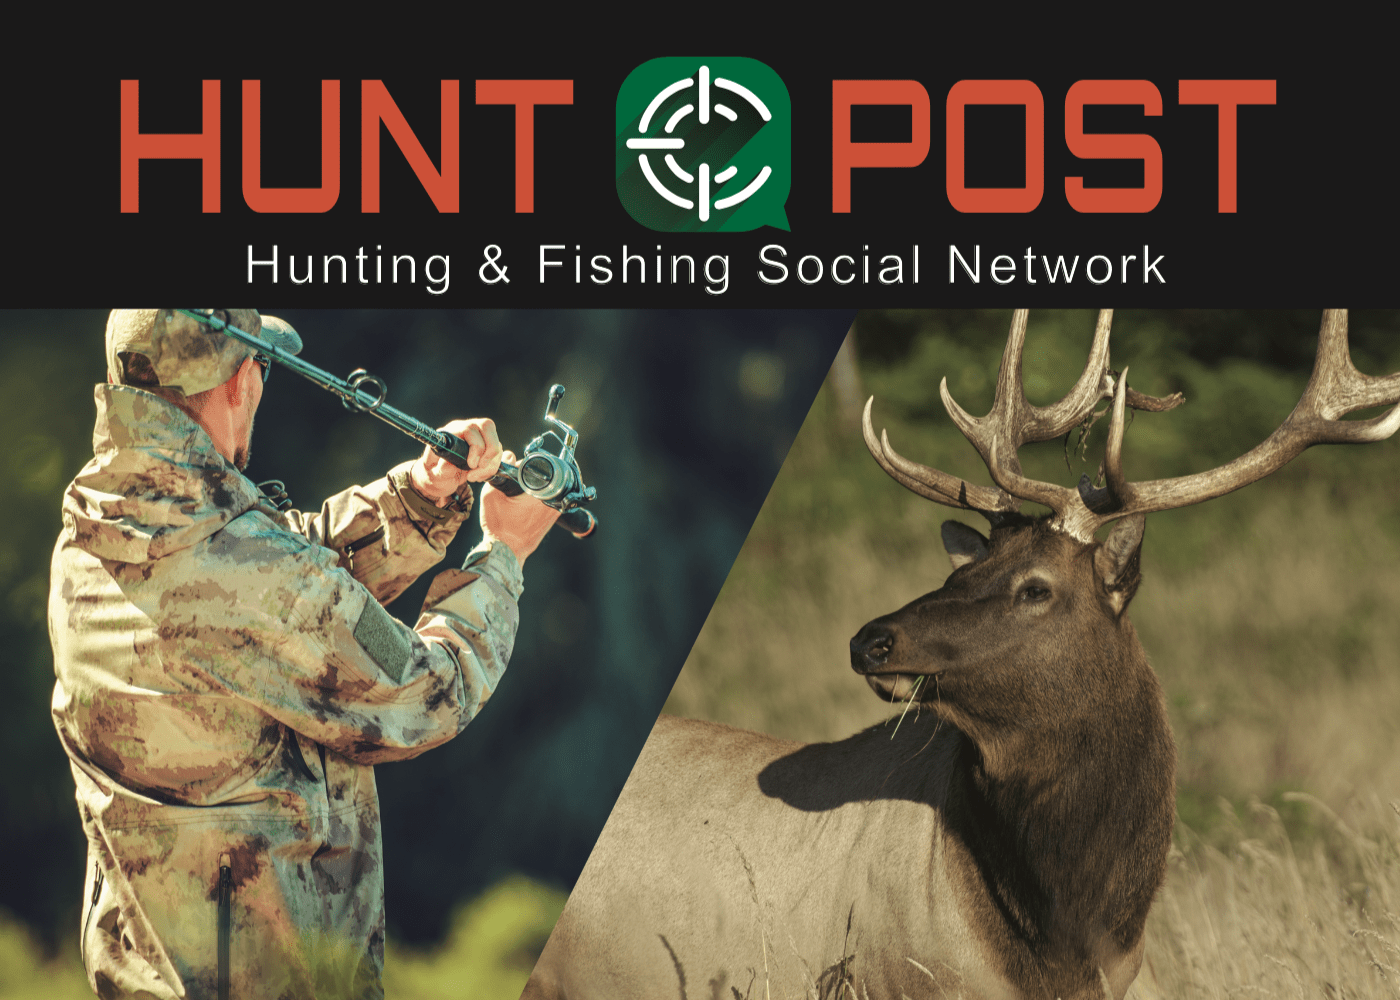 Social Life Network Doubles Down on E-Commerce for Hunting and Fishing Community, Launches HuntPost.com Marketplace